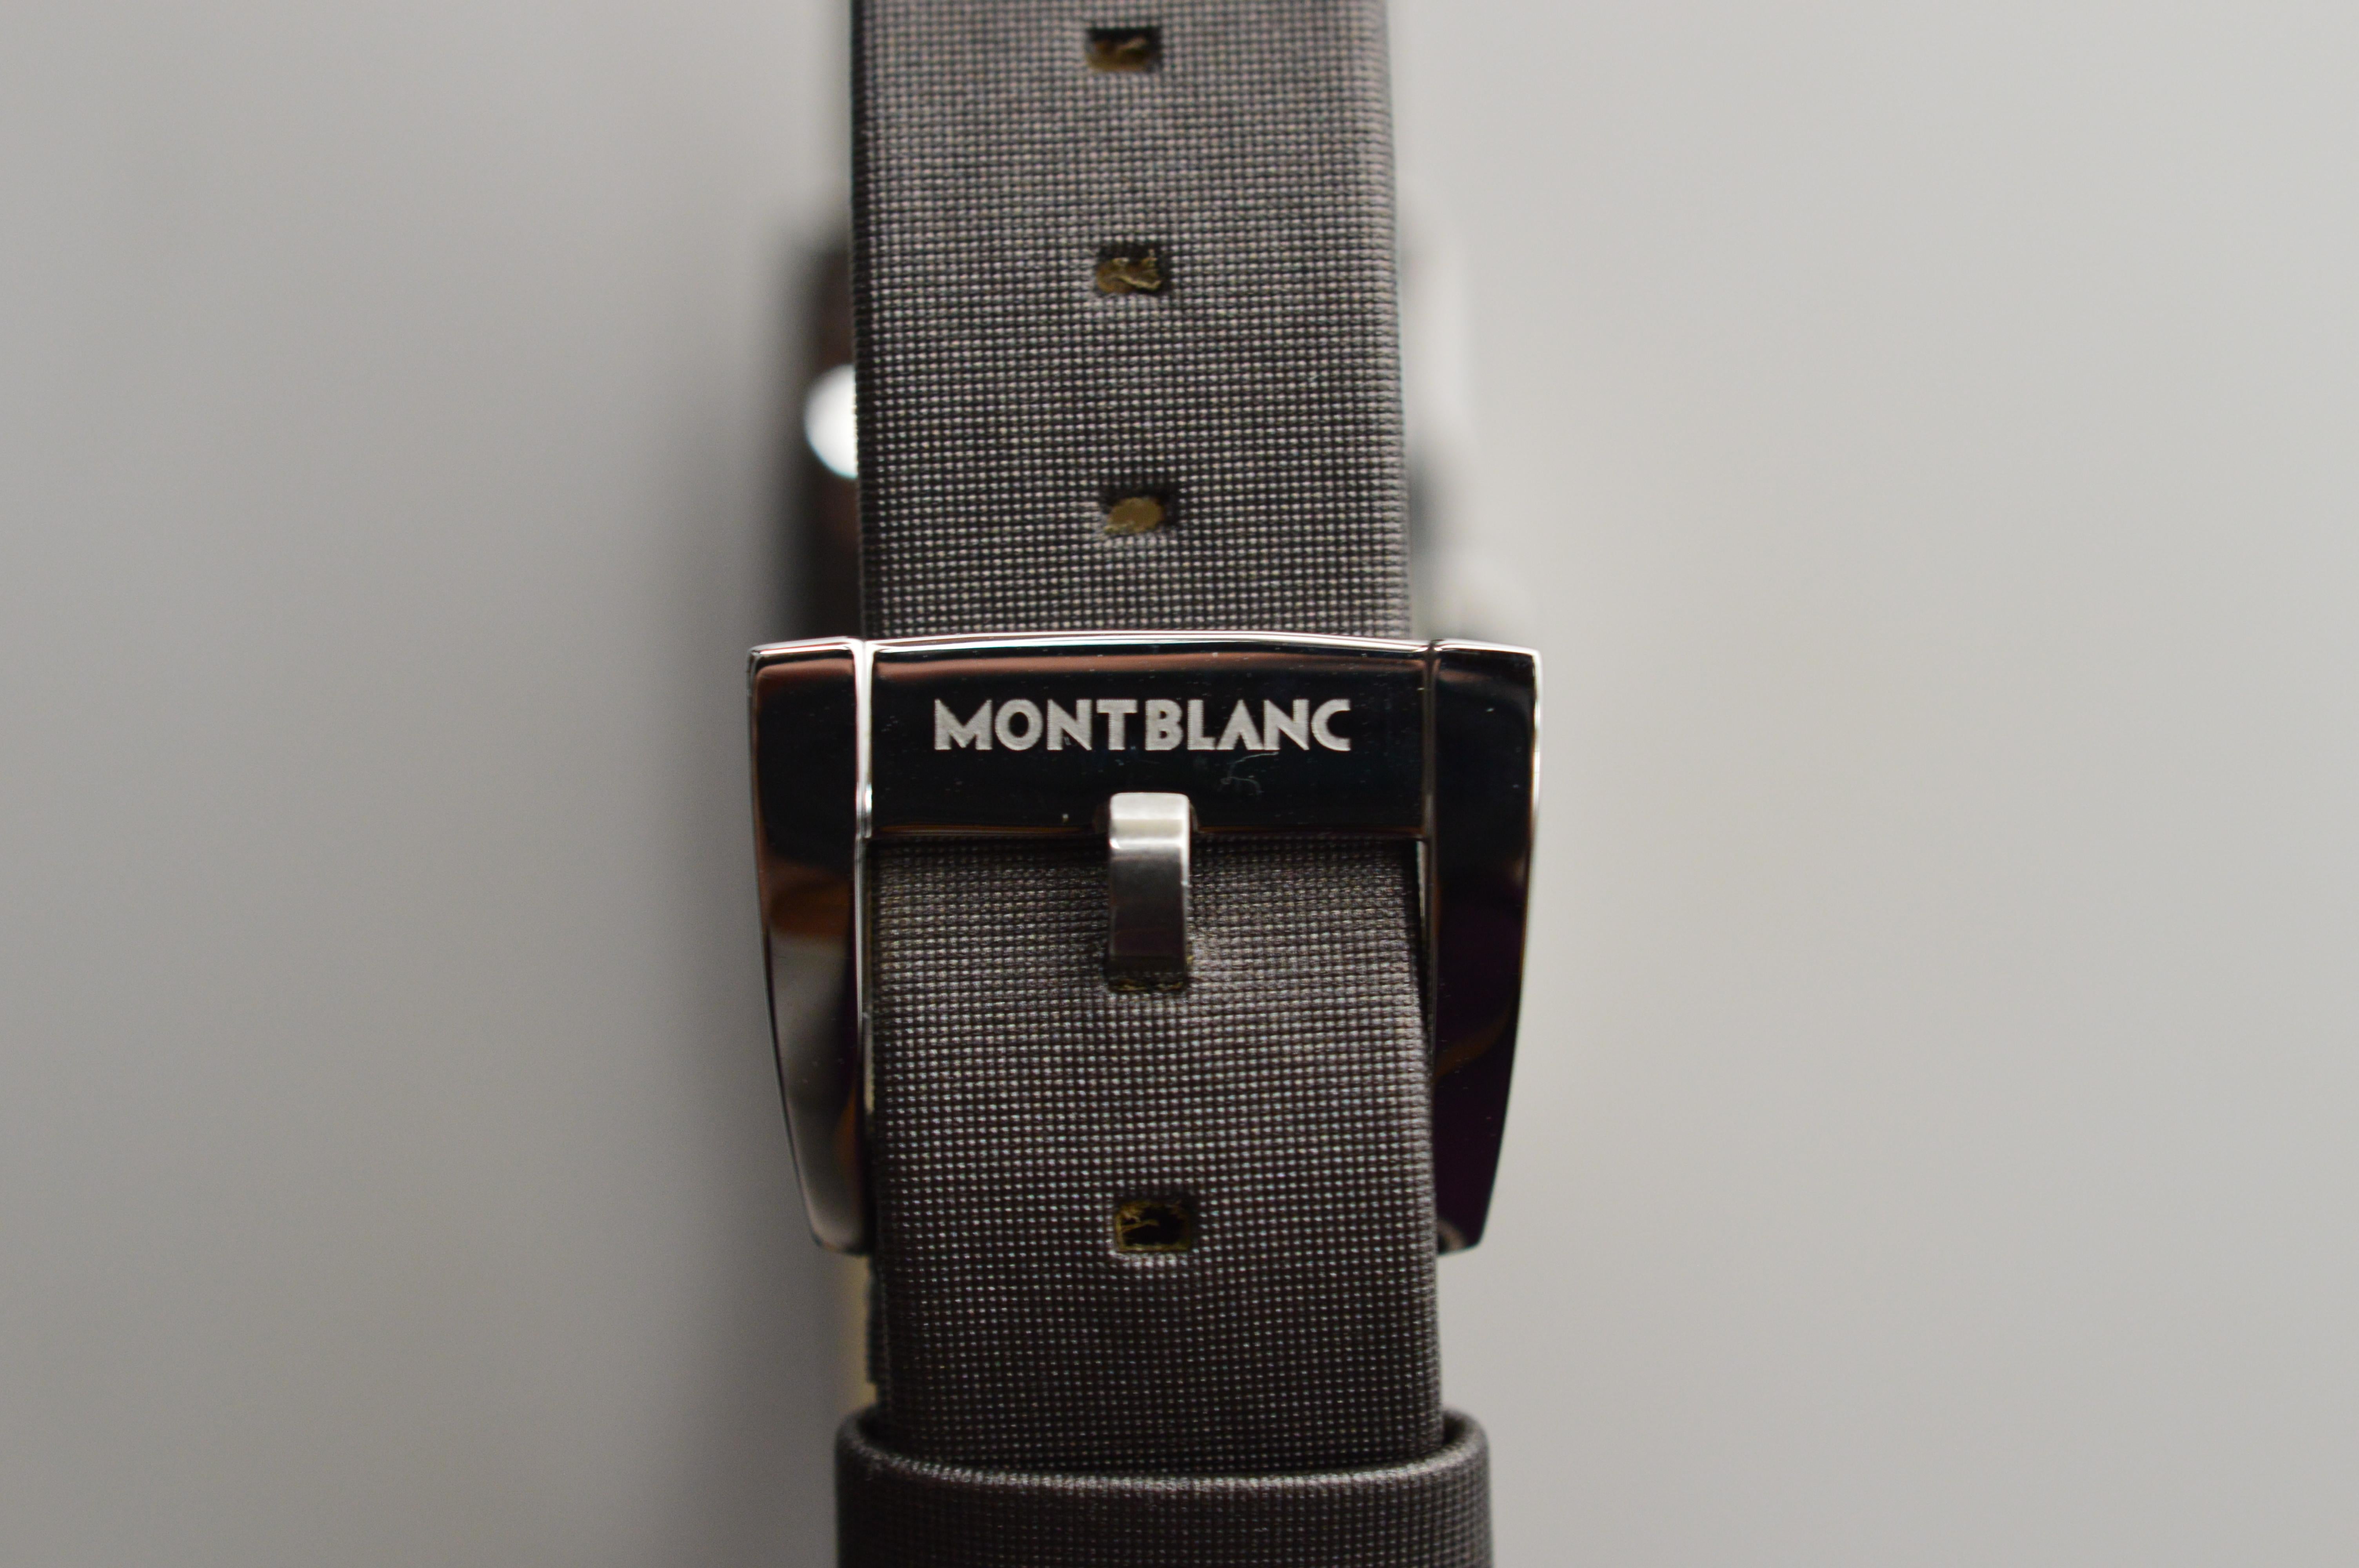 Womens Montblanc Stainless Steel Profile Wristwatch In Excellent Condition For Sale In Mount Kisco, NY